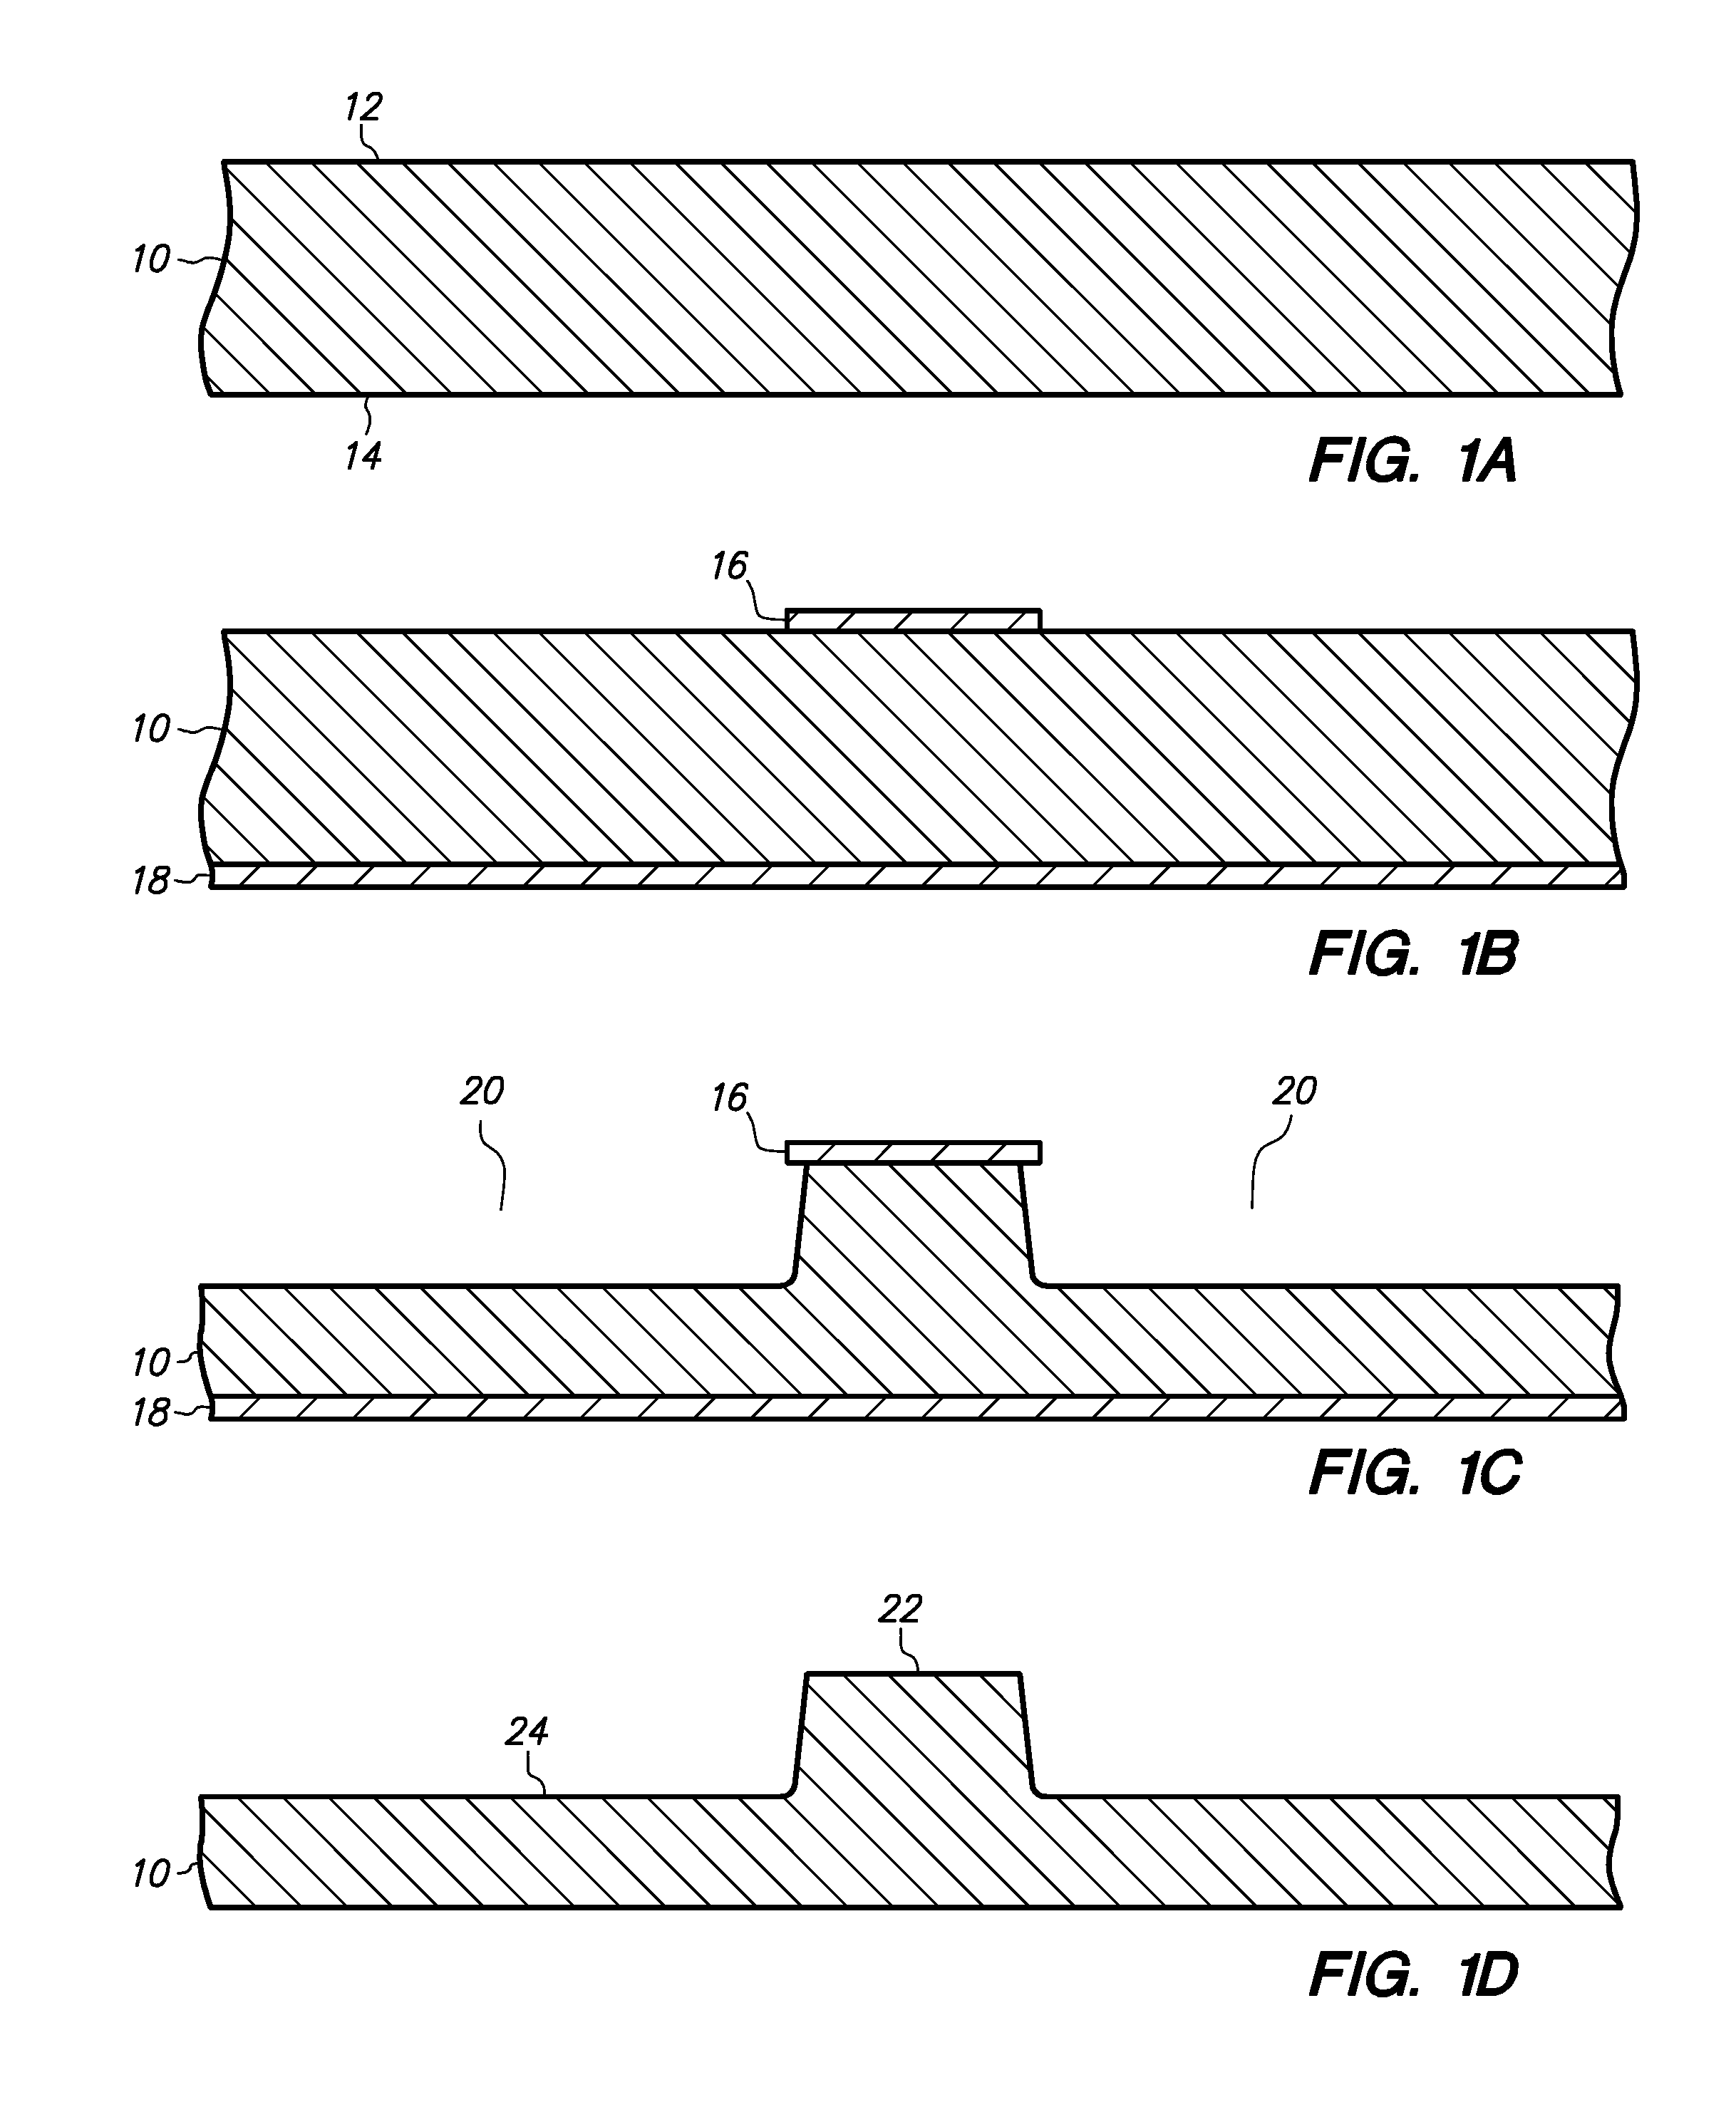 Method of making a semiconductor chip assembly with a post/base heat spreader and dual adhesives